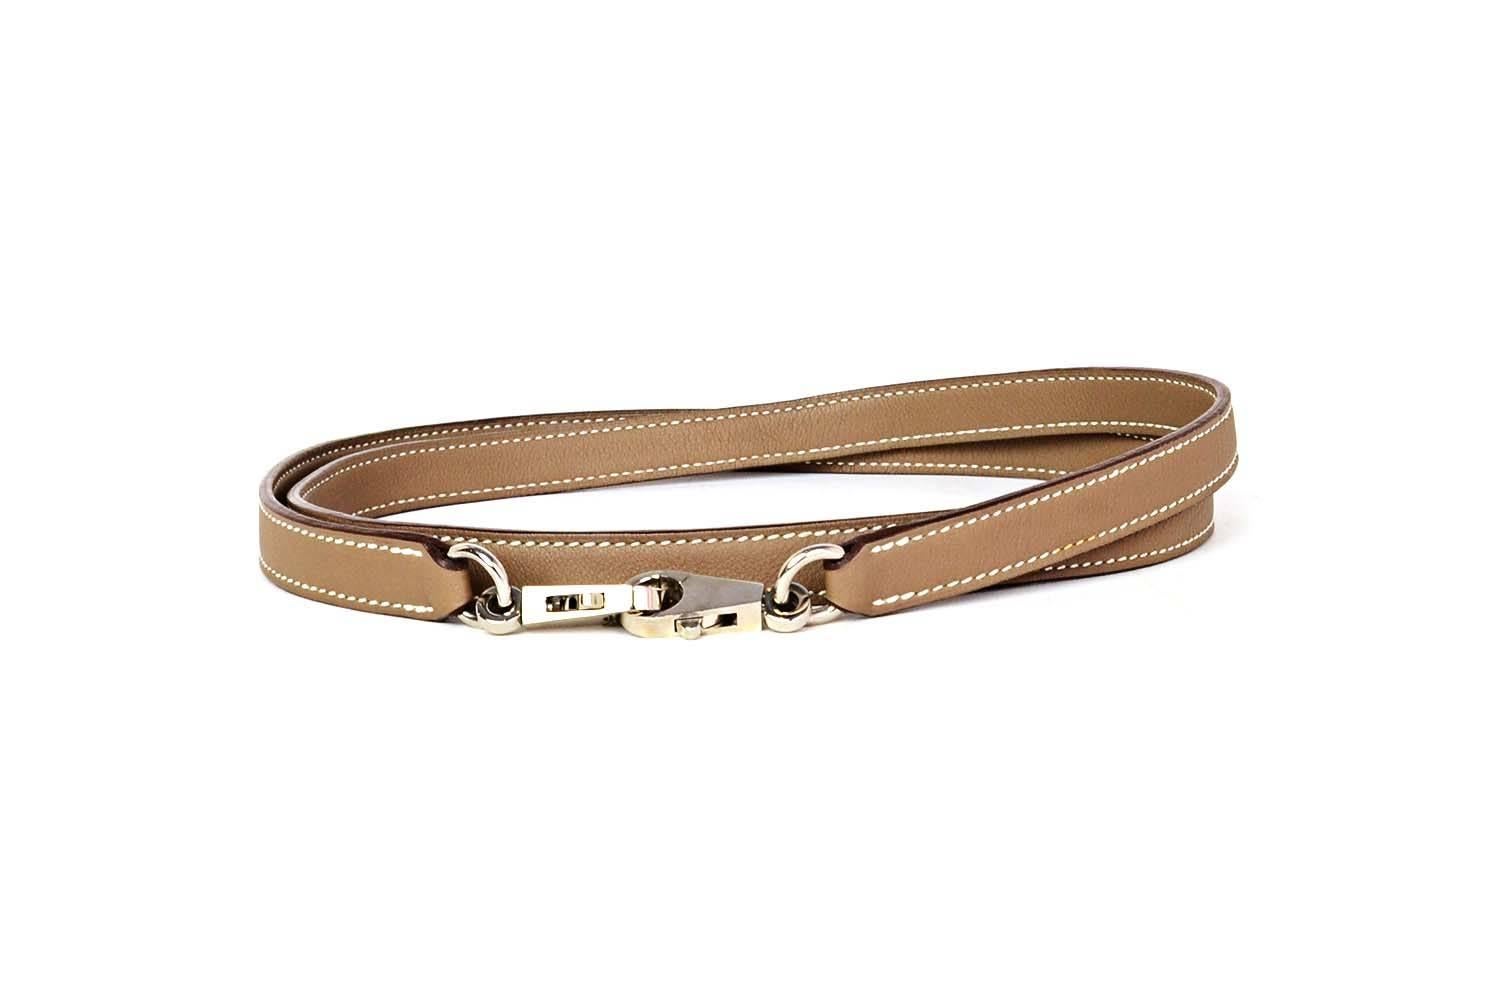 Hermes Swift Etoupe Kelly/Bolide Bag Strap 
Note: This bag strap was custom made and therefore does not have an Hermes date stamp
Made In: France
Color: Etoupe
Hardware: Palladium
Materials: Leather and metal
Closure/Opening: Double sided